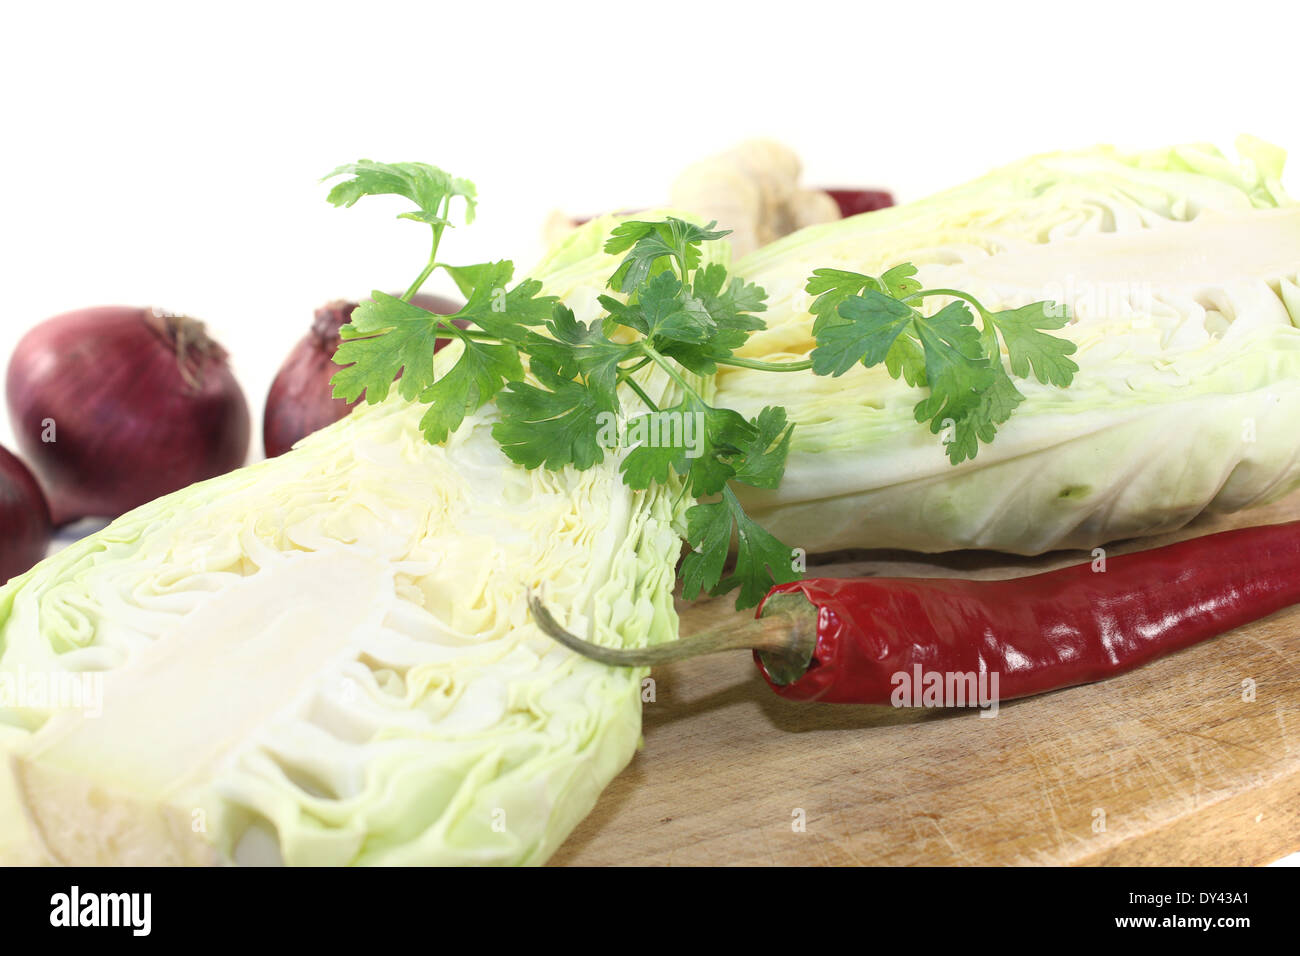 sweetheart Cabbage with hot peppers and board on a light background Stock Photo